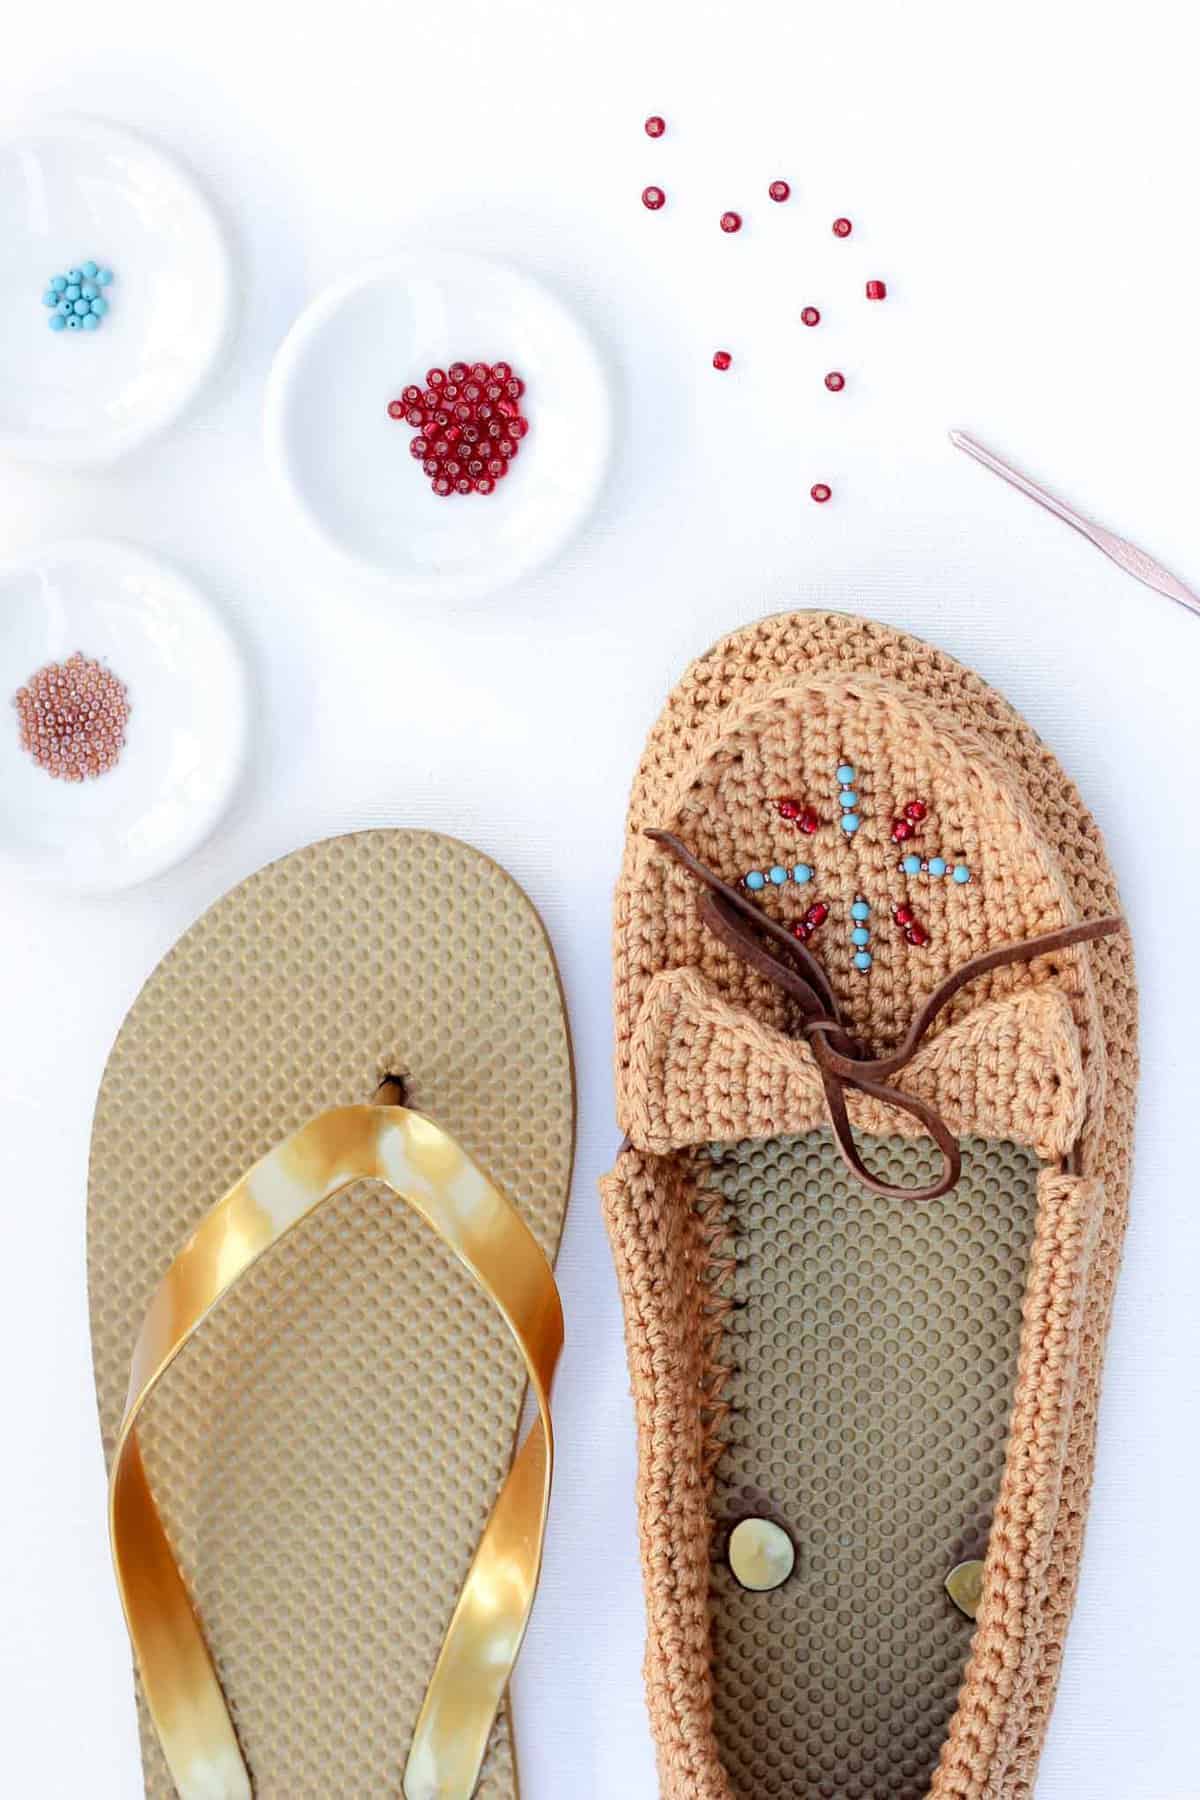 Learn how to crochet shoes with flip flop soles with this free crochet moccasin pattern and video tutorial! These crochet moccasins make super comfortable women's shoes or slippers and can be customized however you wish. Made from Lion Brand 24/7 Cotton in "Camel" color. Seed beads add the perfect bohemian touch!